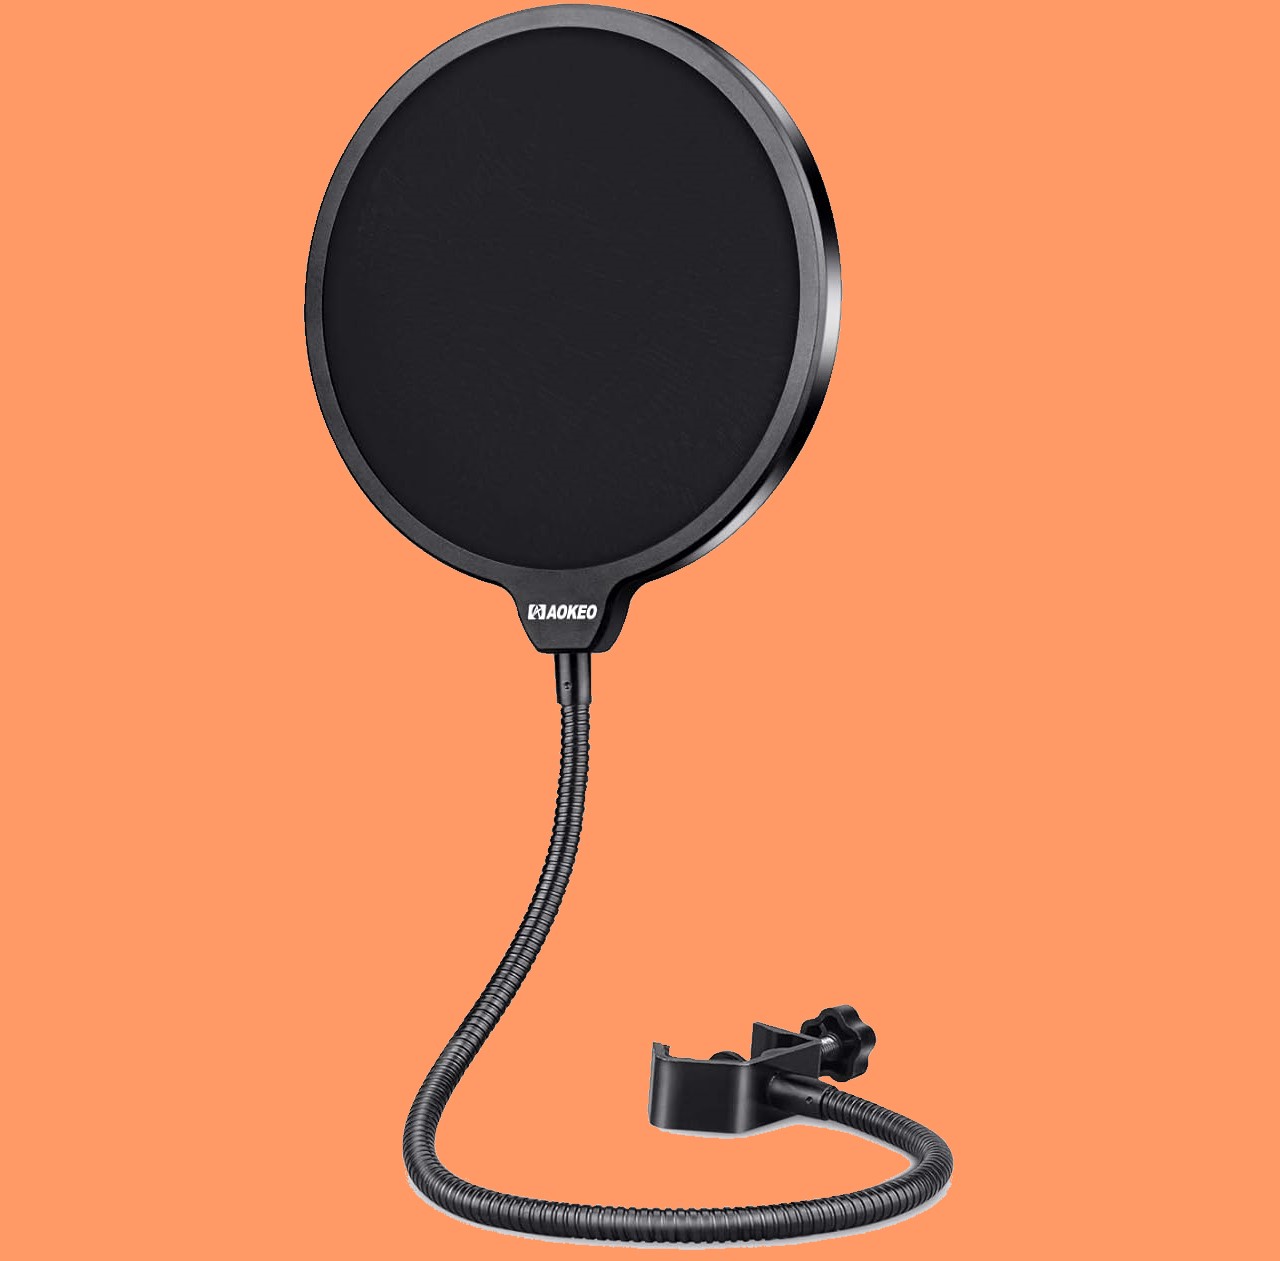 The Aokeo Professional Microphone Pop Filter, a pop filter for Blue Yeti, has adjustable gooseneck holder that fully supports the filter's weight and keep it in place.